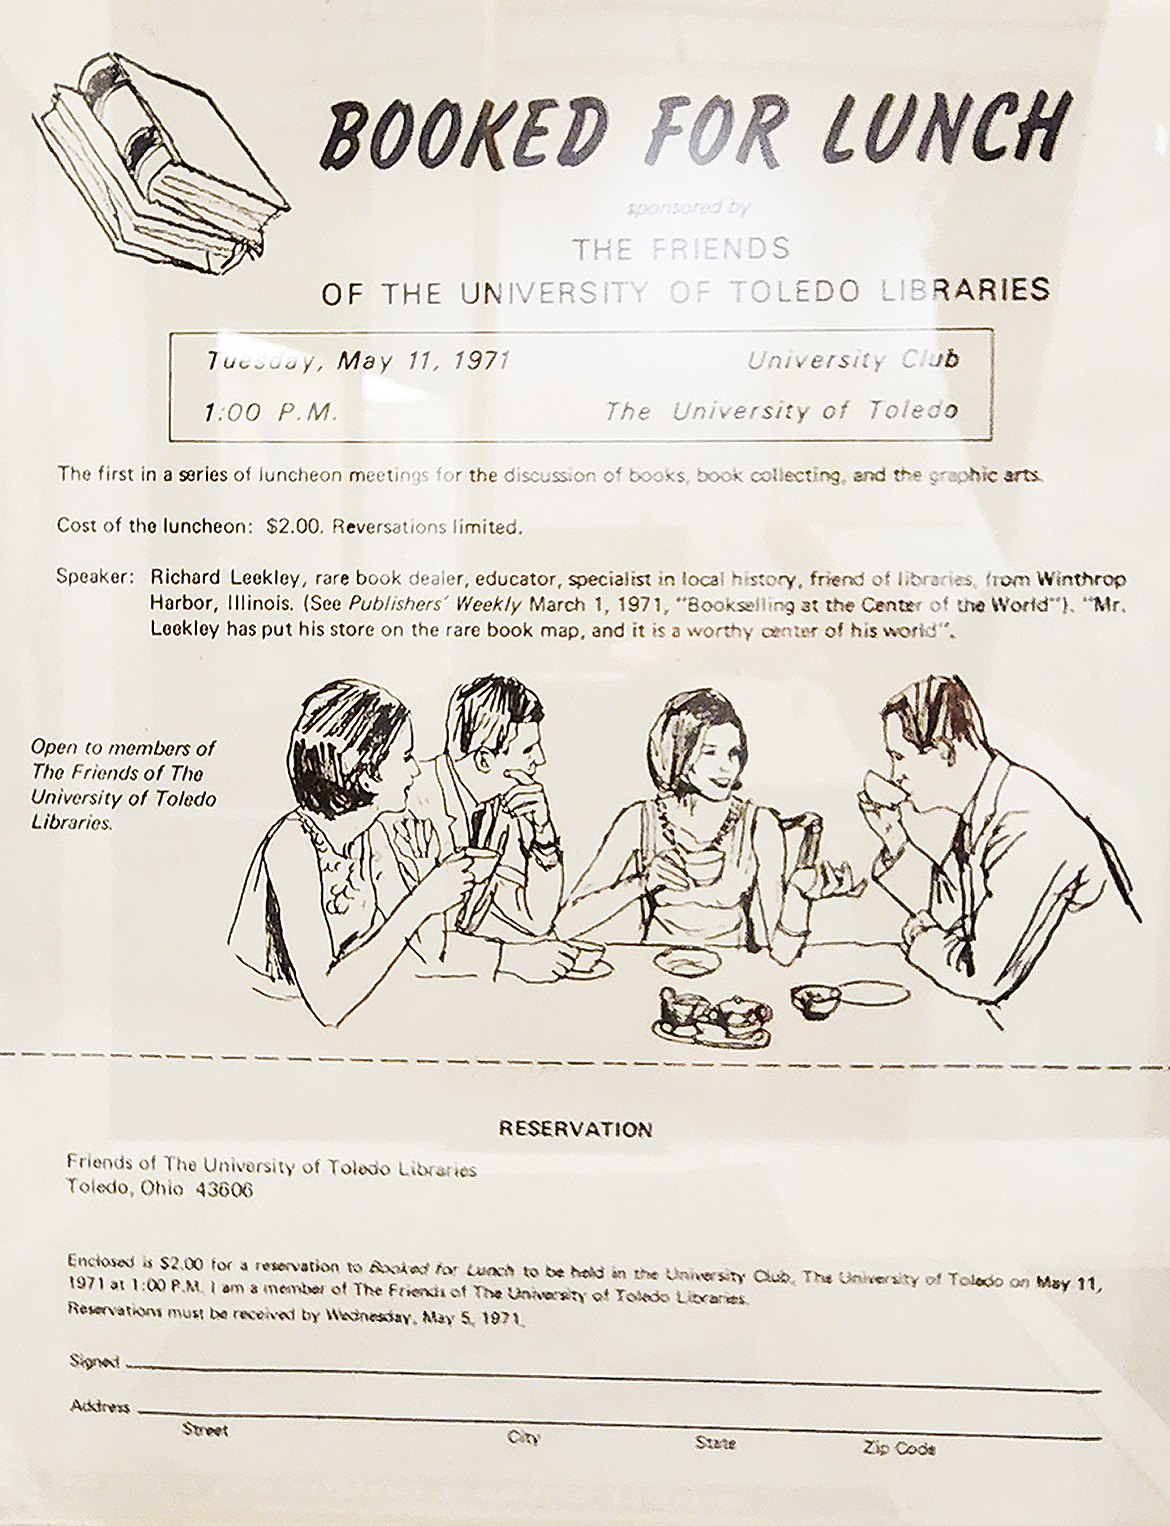 Reservation form for the Friends of the university of Toledo Library luncheon series, May 11, 1971